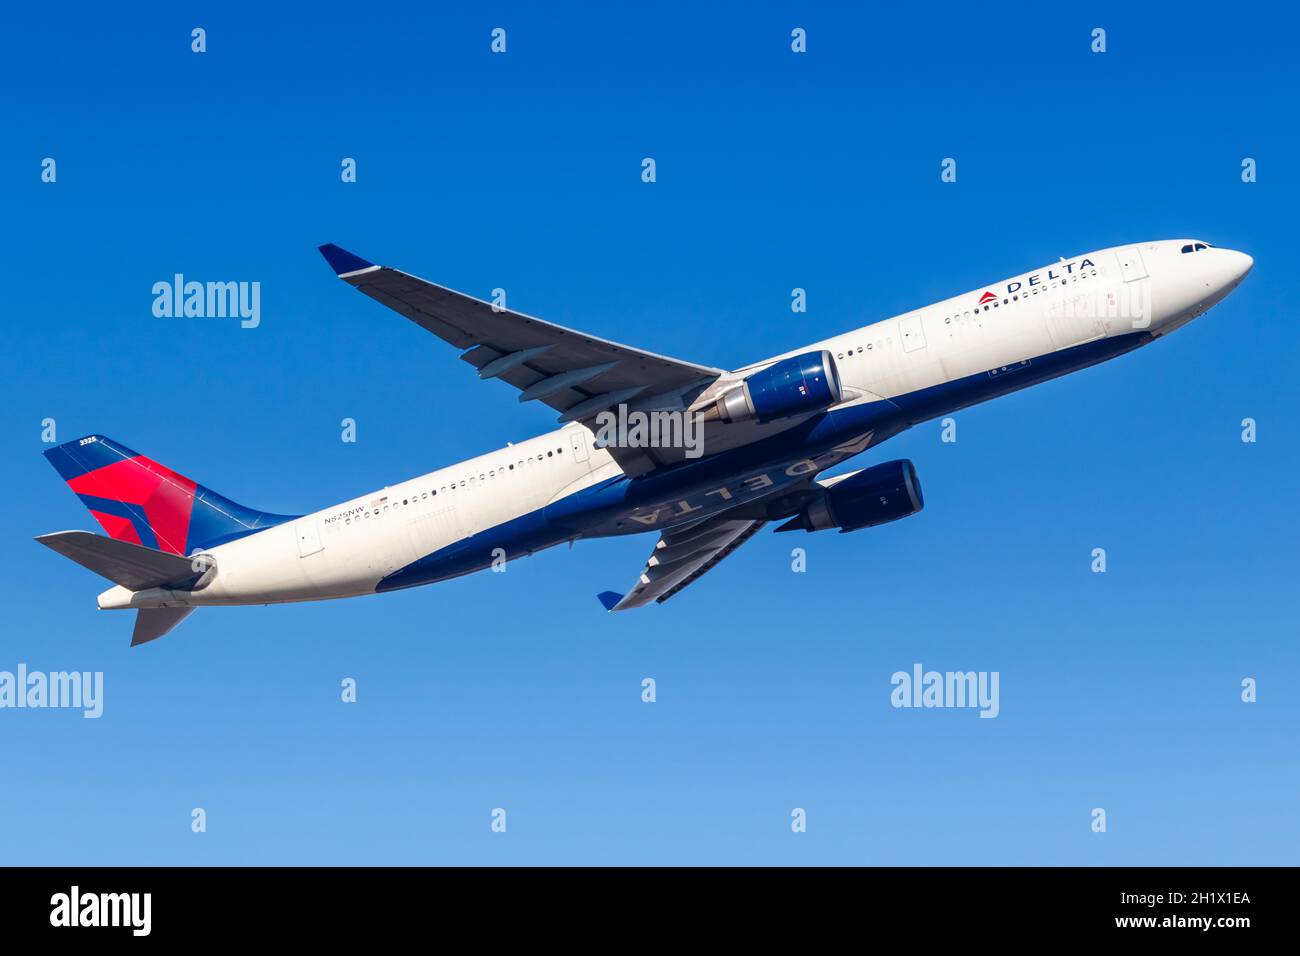 Frankfurt, Germany - February 13, 2021: Delta Air Lines Airbus A330-300 airplane at Frankfurt Airport (FRA) in Germany. Airbus is a European aircraft Stock Photo